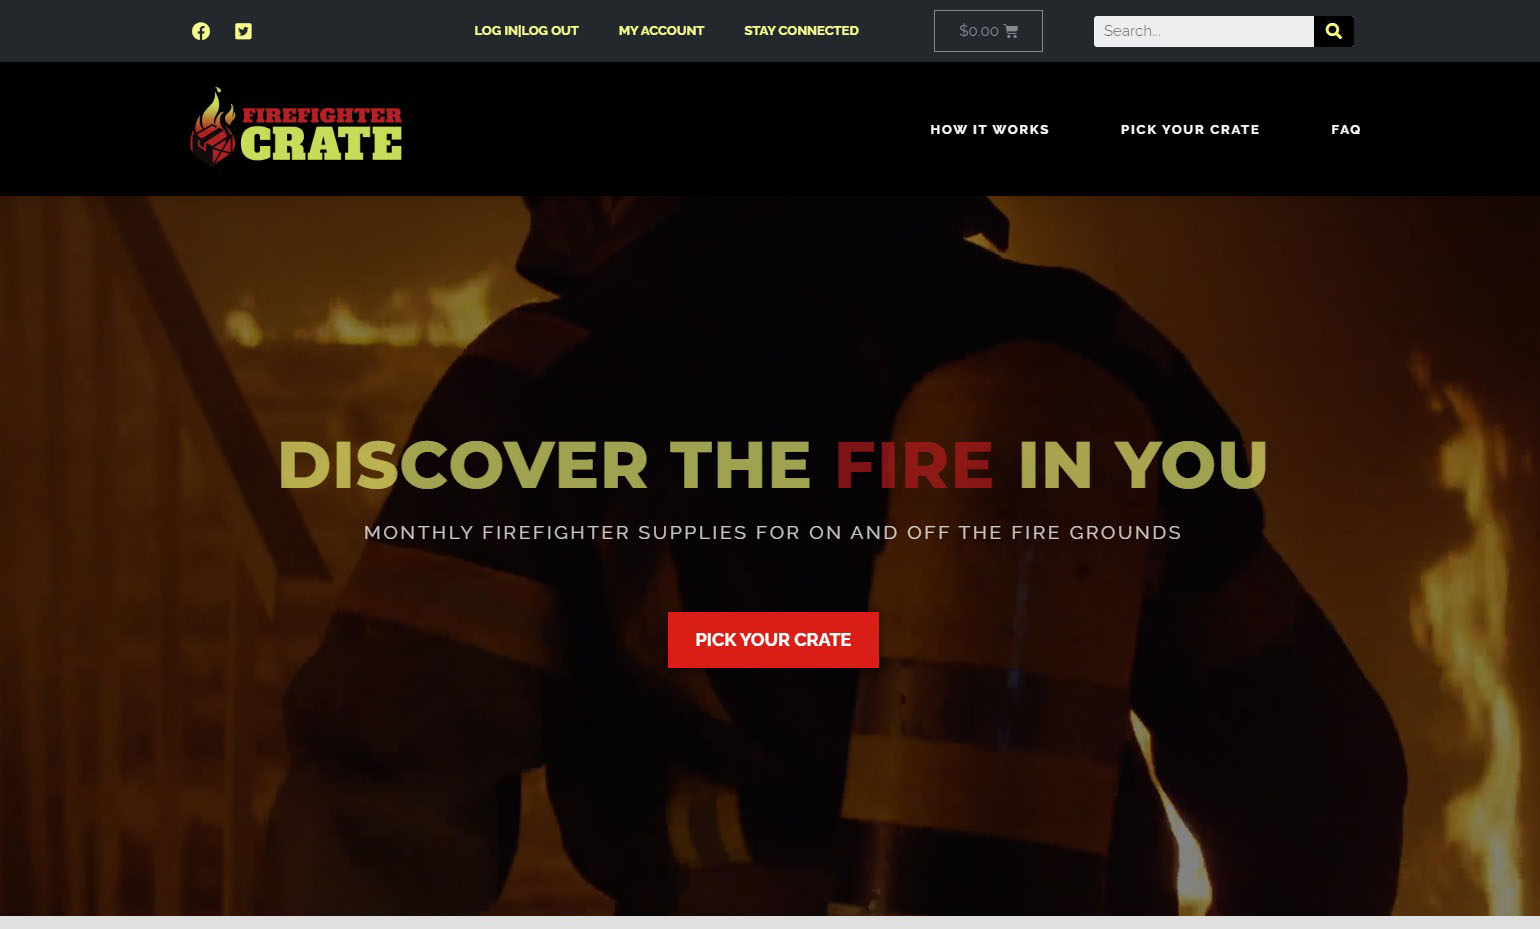 Firefighter Crate